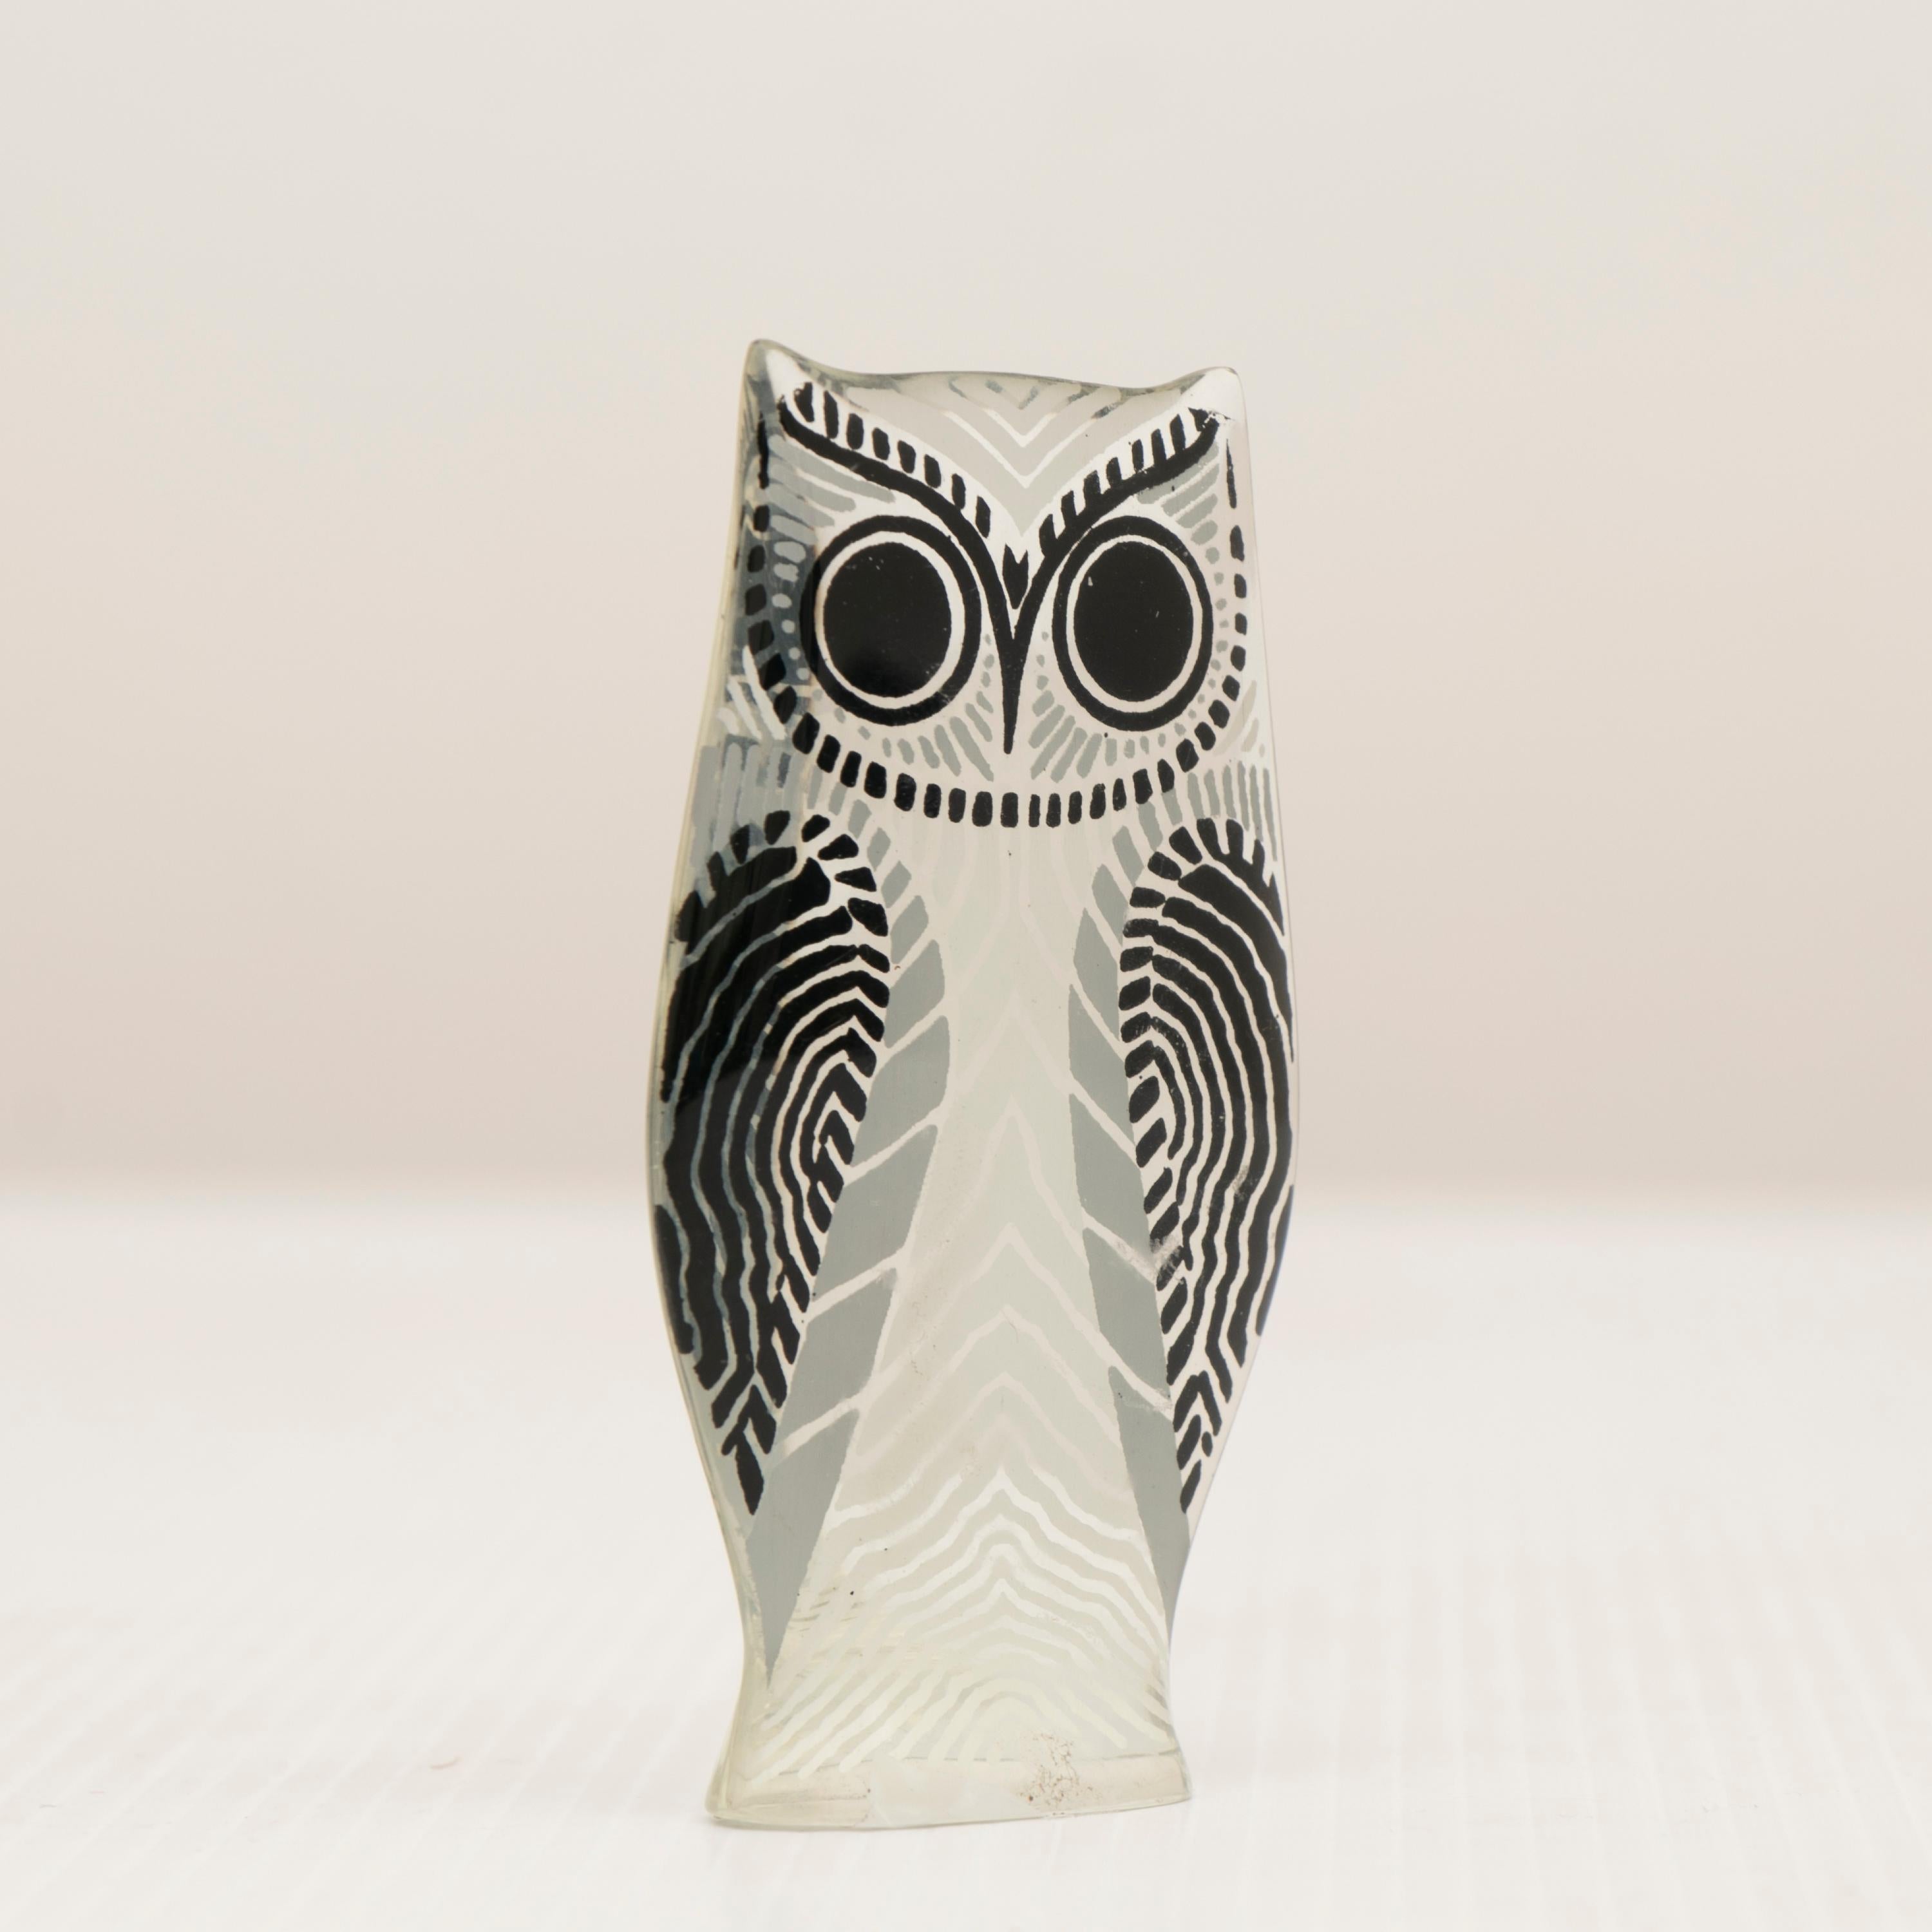 1950s acrylic black and white owl by Brazilian artist Abraham Palatnik. An op art design with Kinetic black lines which give the optical illusion that the owl is always looking at you whichever direction it faces. 

This vintage item is in